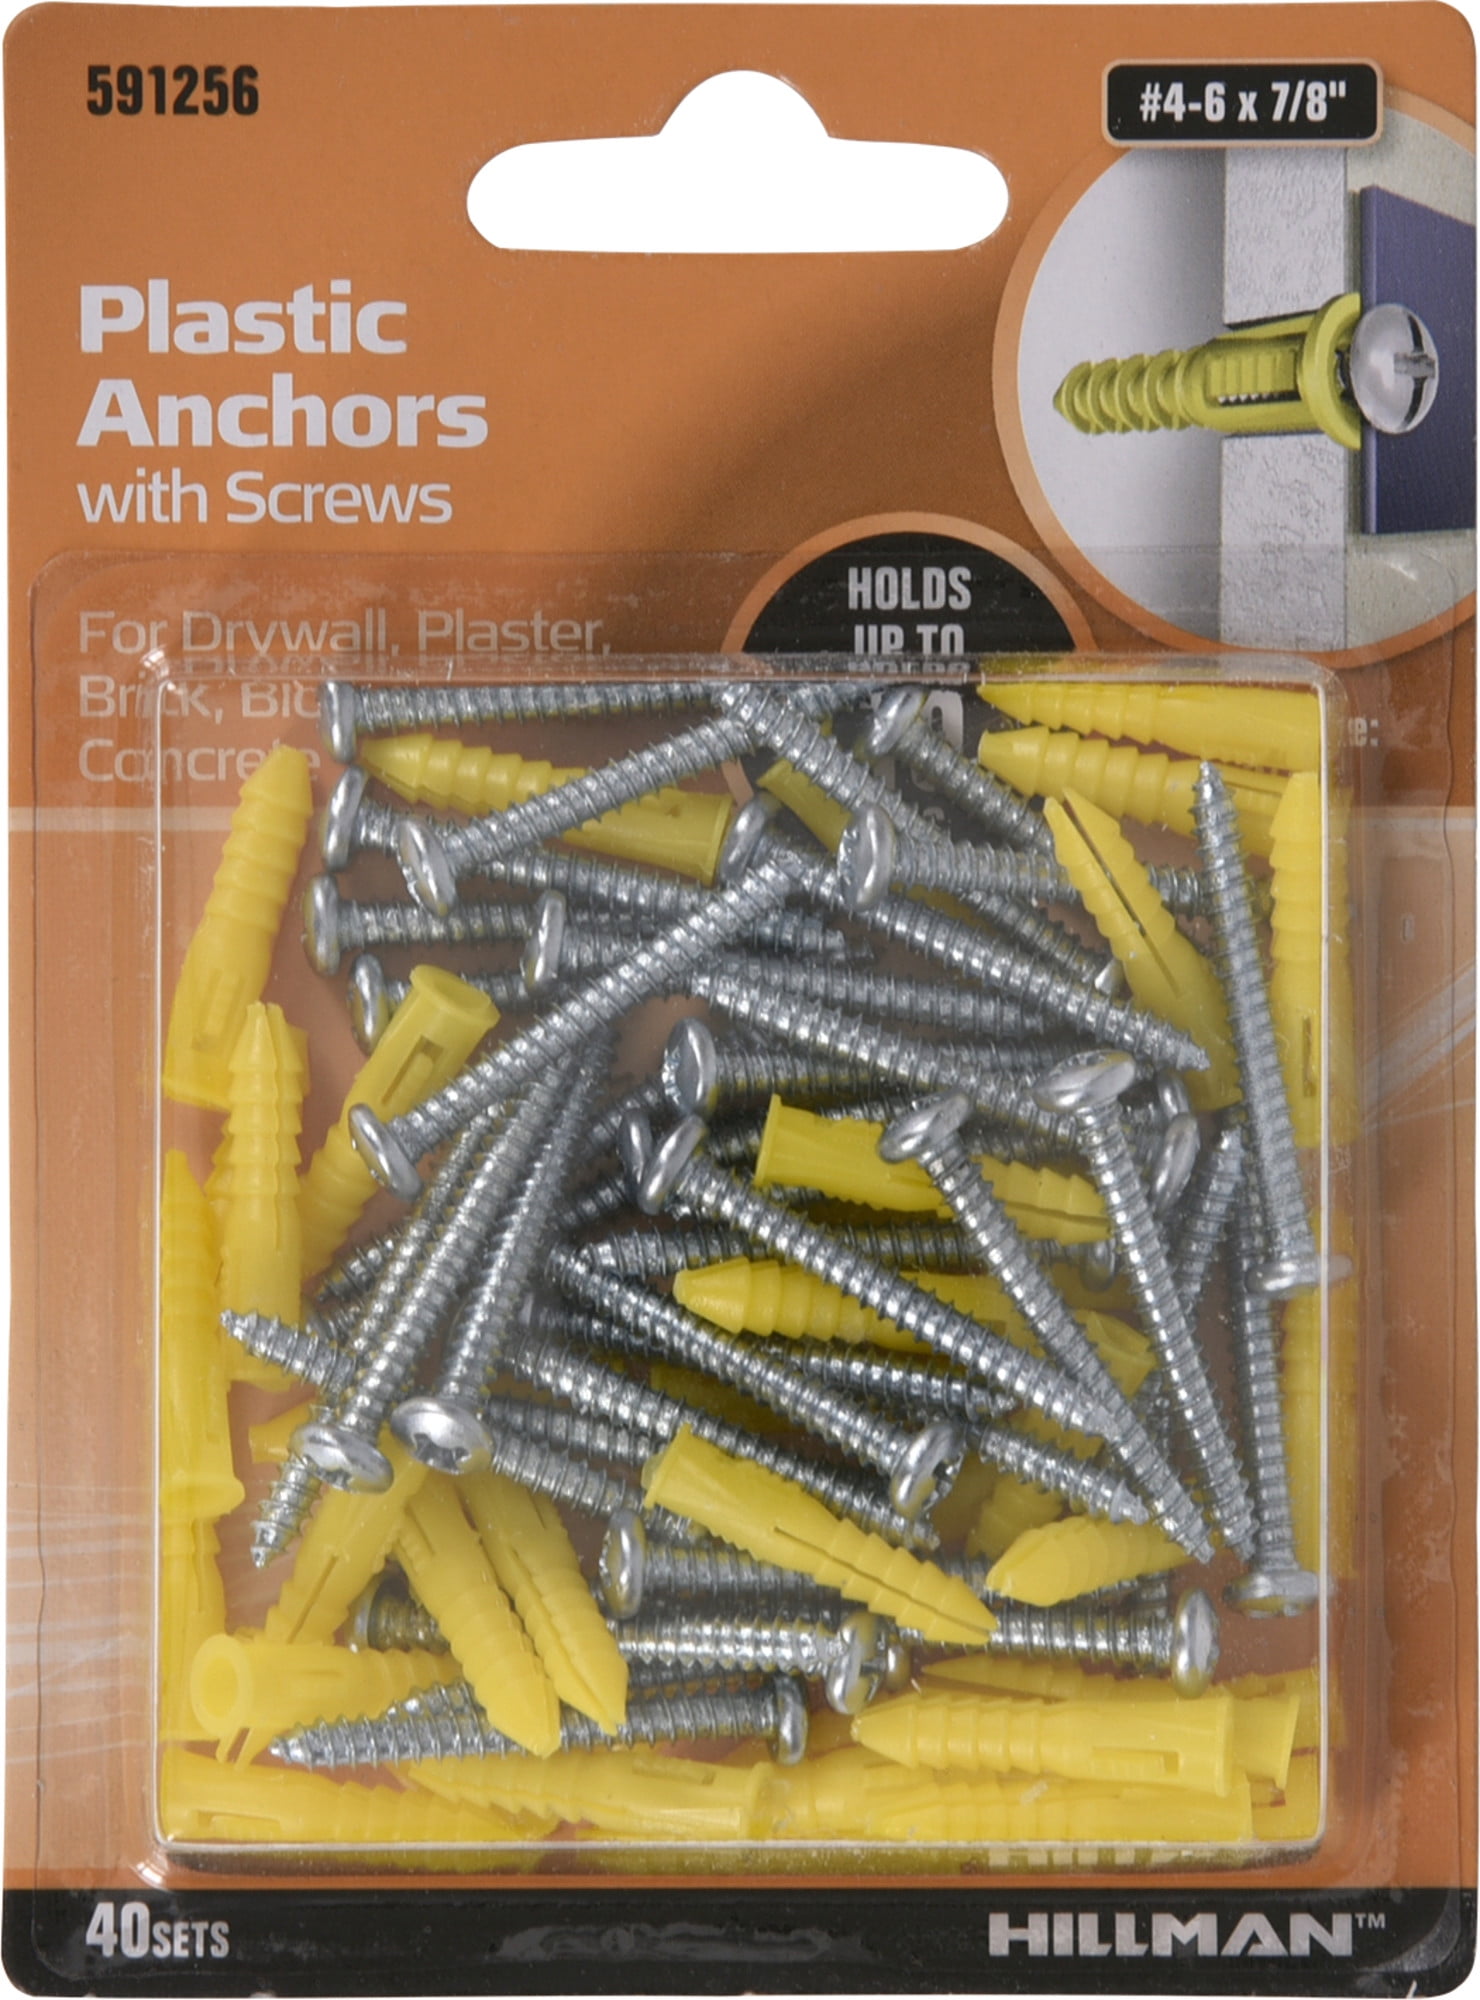 Hillman Ribbed Plastic Anchors With Screws Size 4-6 8 Pan Head Phillips 75/Pack 